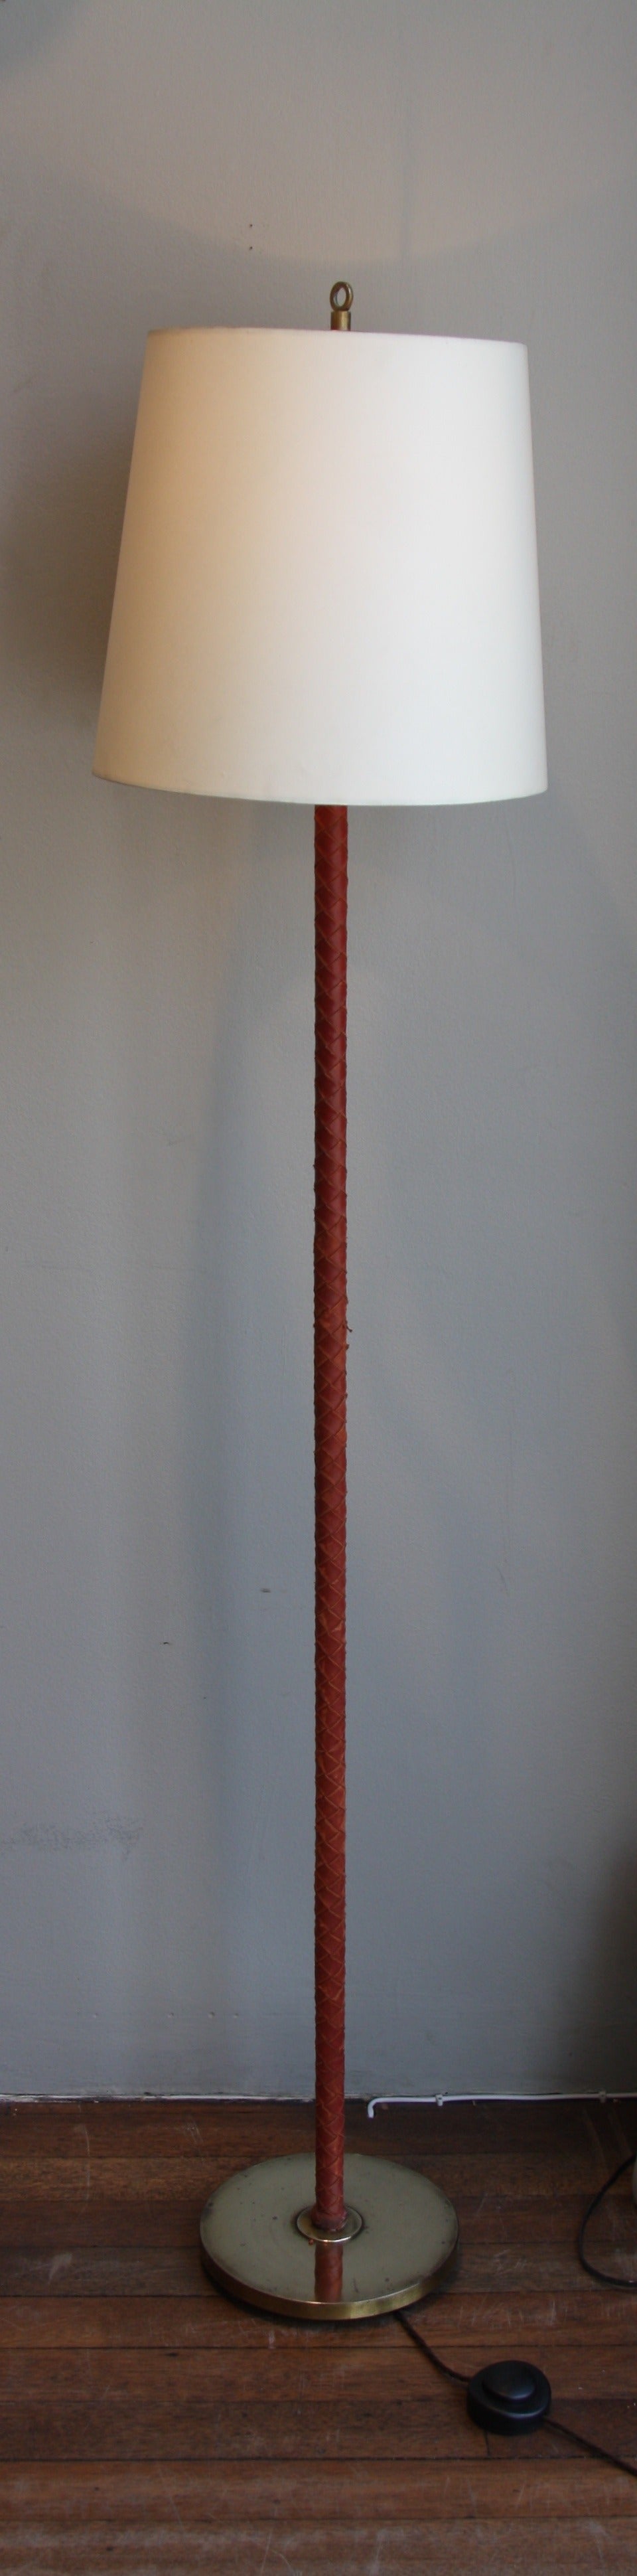 Woven red leather stem floor light with a brass foot and finial.